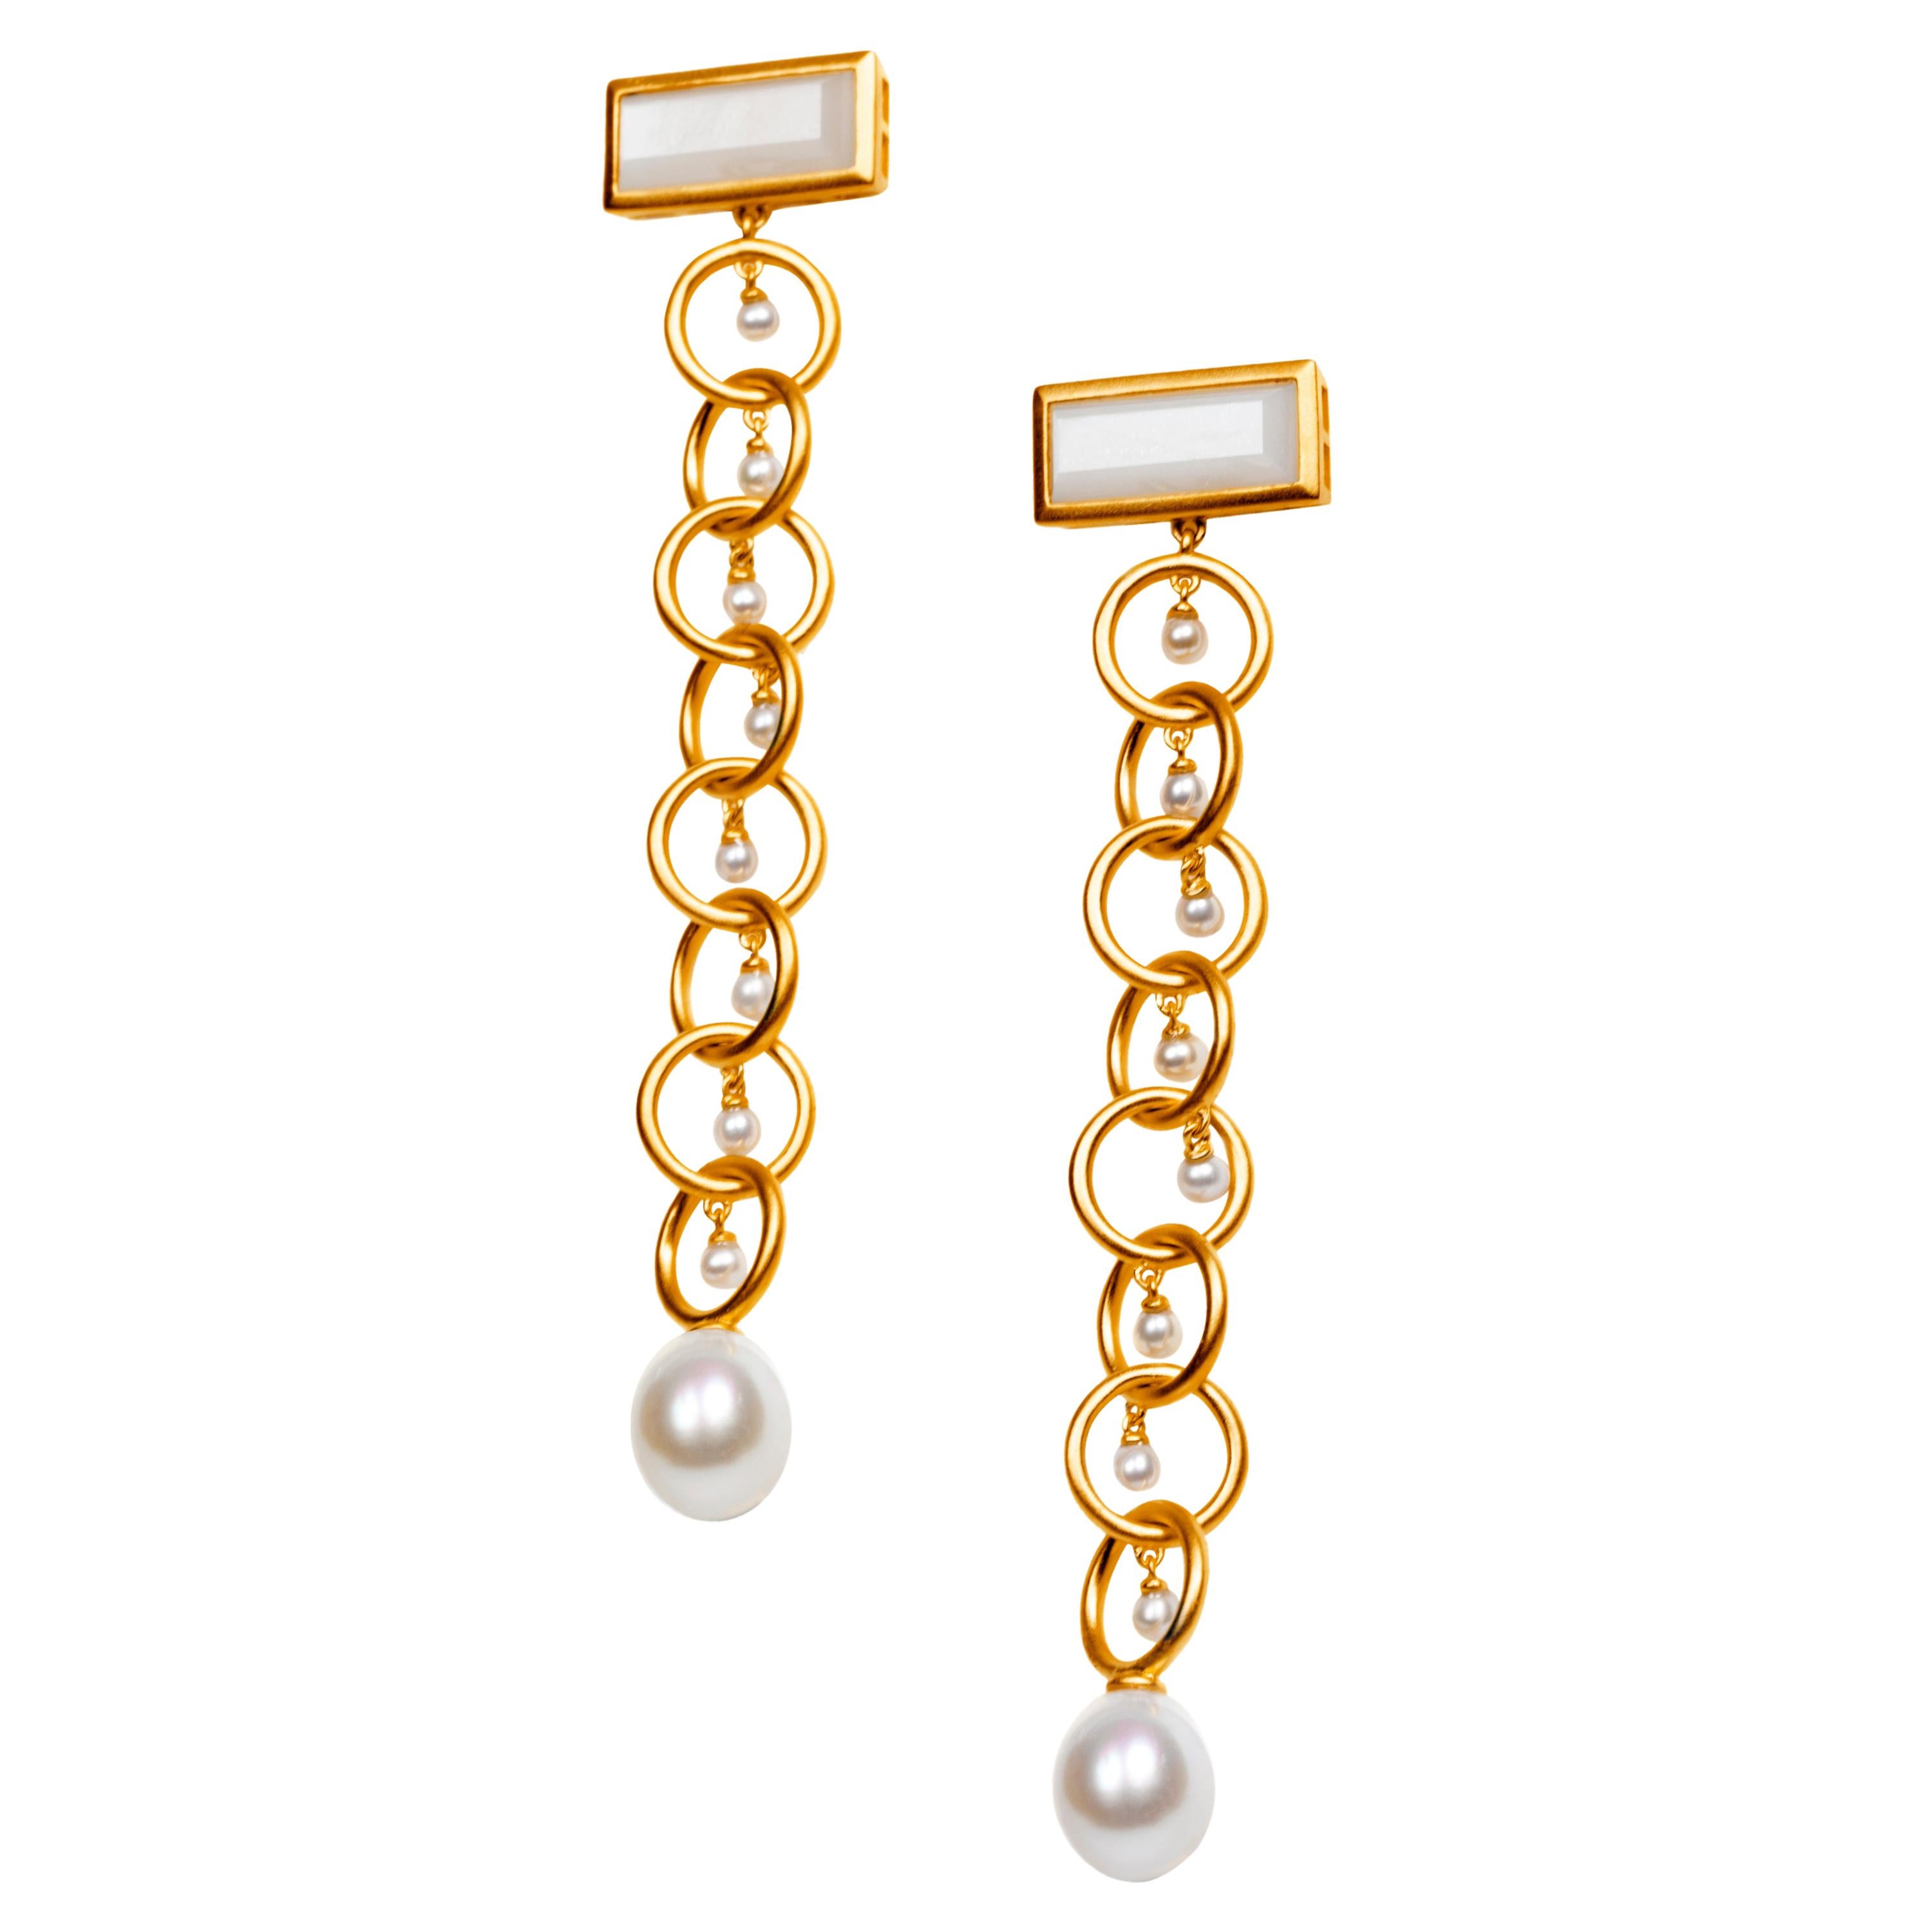 Drop Links Earrings the Rebel Queen Nefertiti with Moonstone and Pearls